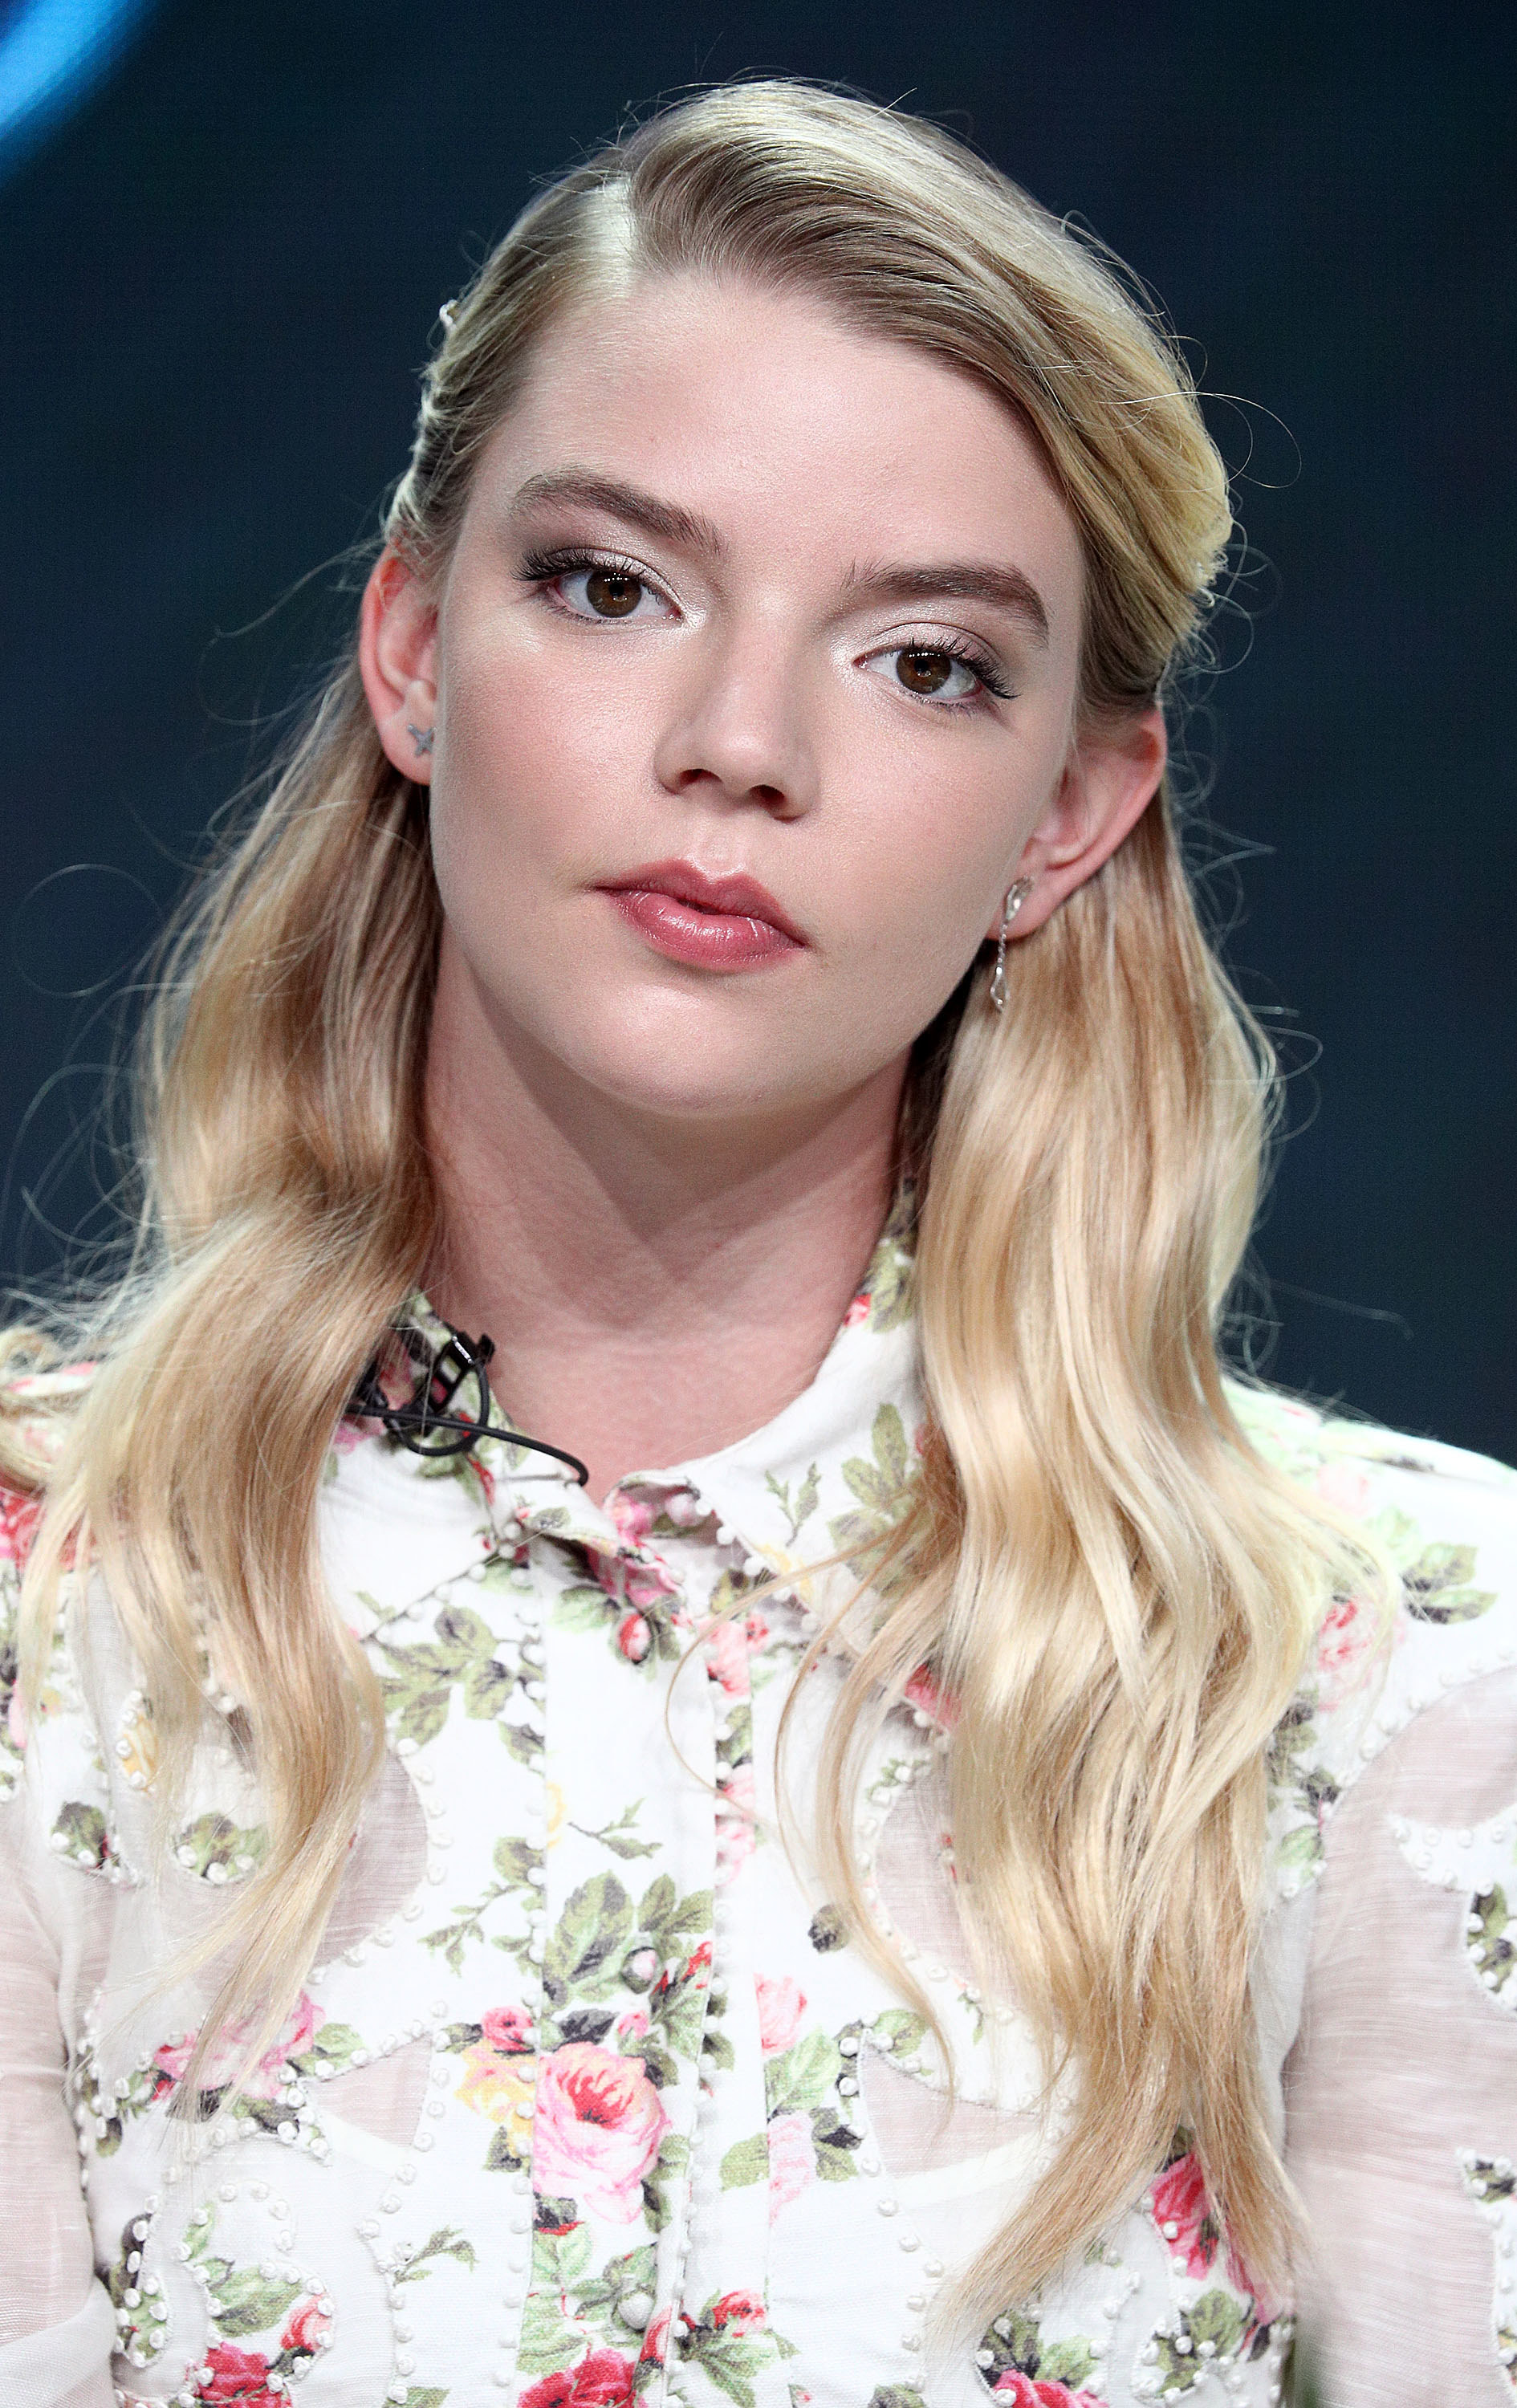 Anya Taylor Joy was made fun of for her looks